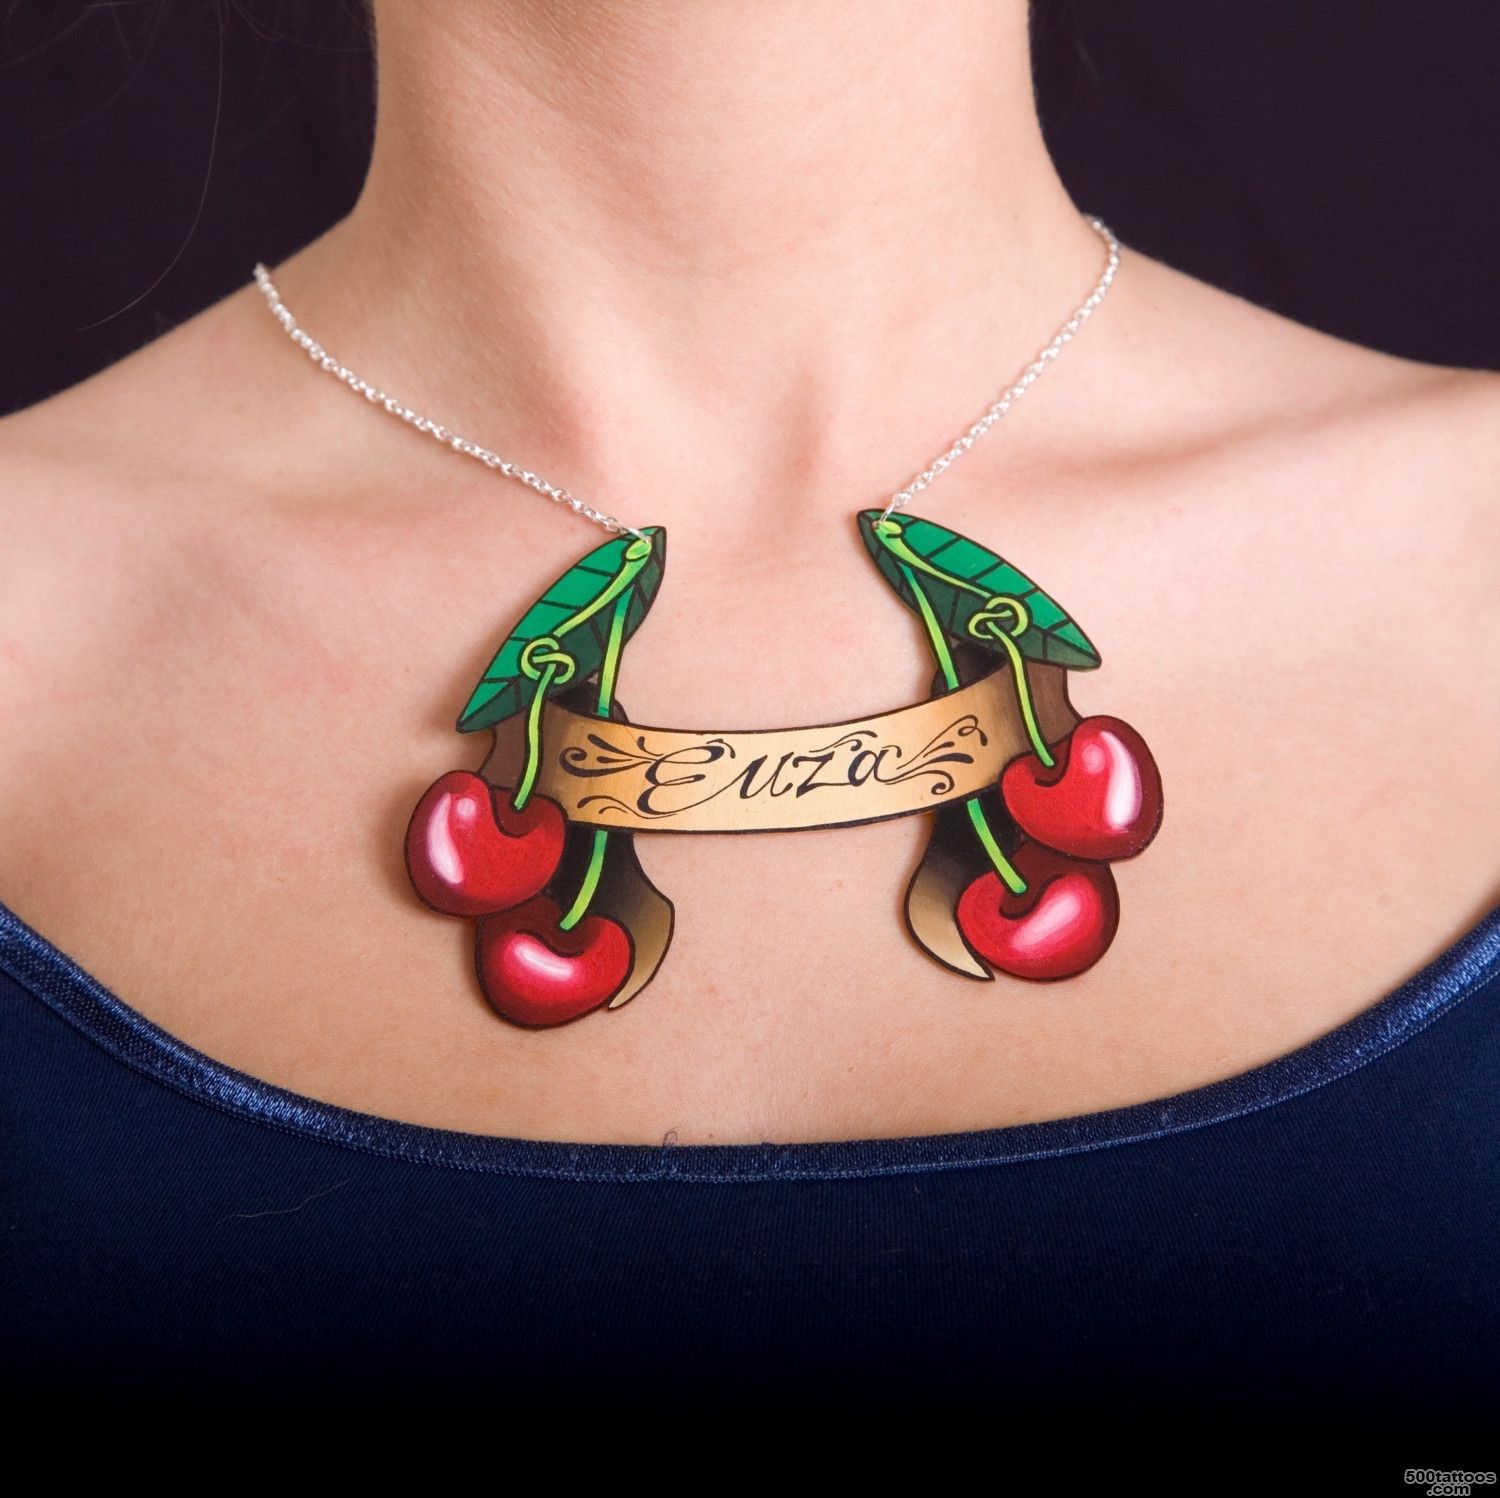 Pin Cherry Tattoo As A Necklace Tattoos20com on Pinterest_23